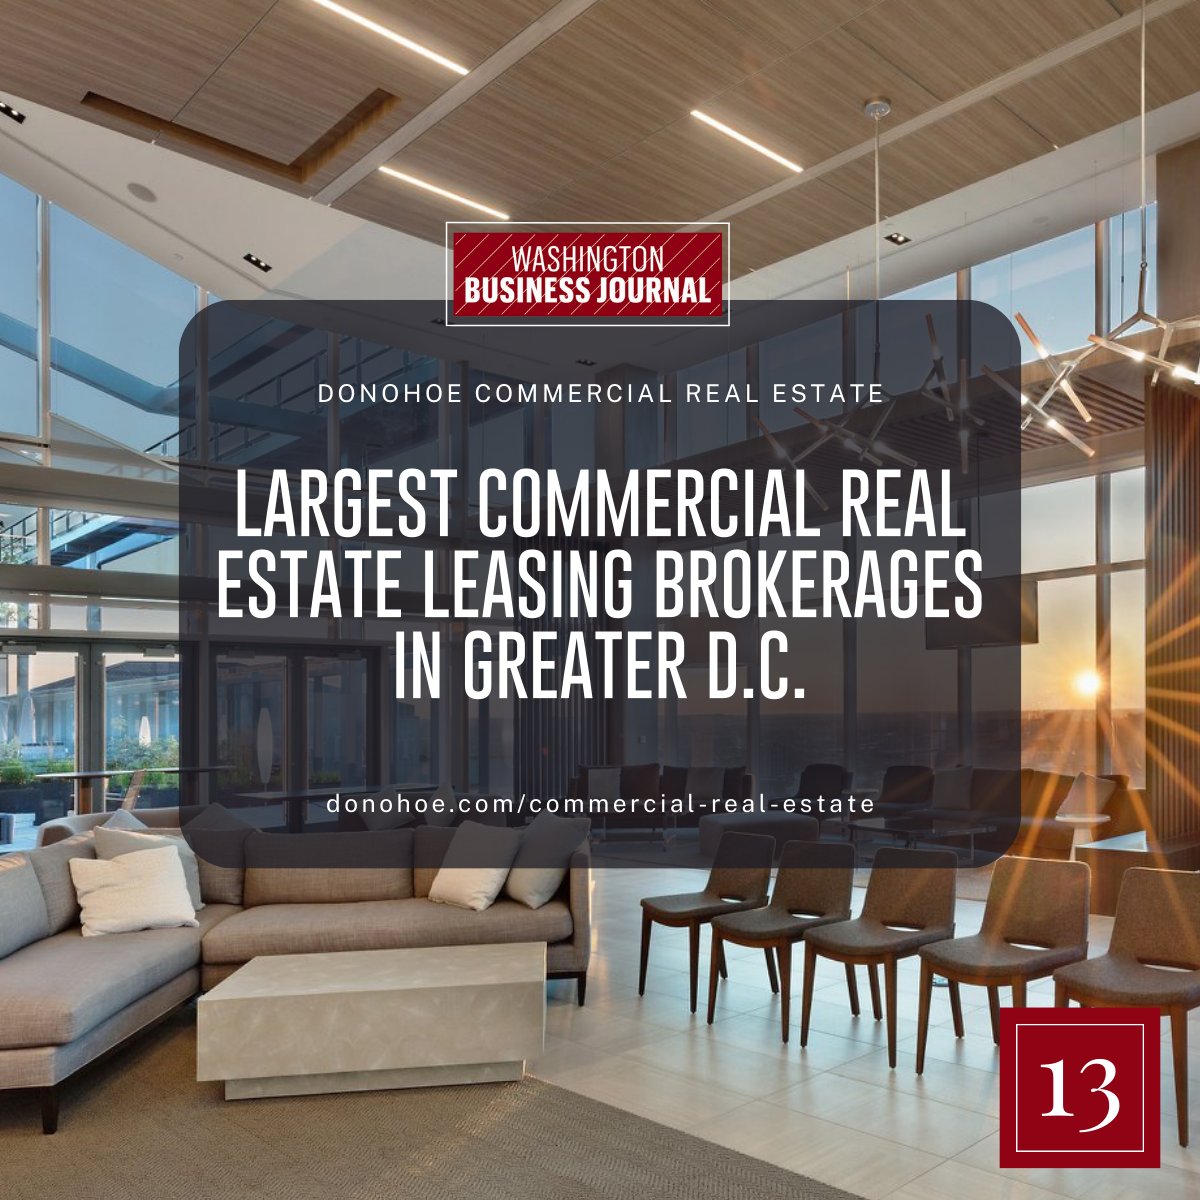 We are proud to have been named one of the Largest Commercial Real Estate Leasing Brokerages in Greater D.C. by The Washington Business Journal!

Read more here: donohoe.com/newsroom/real-…

#commercialleasing #washingtondc #commercialrealestate #industryleadership